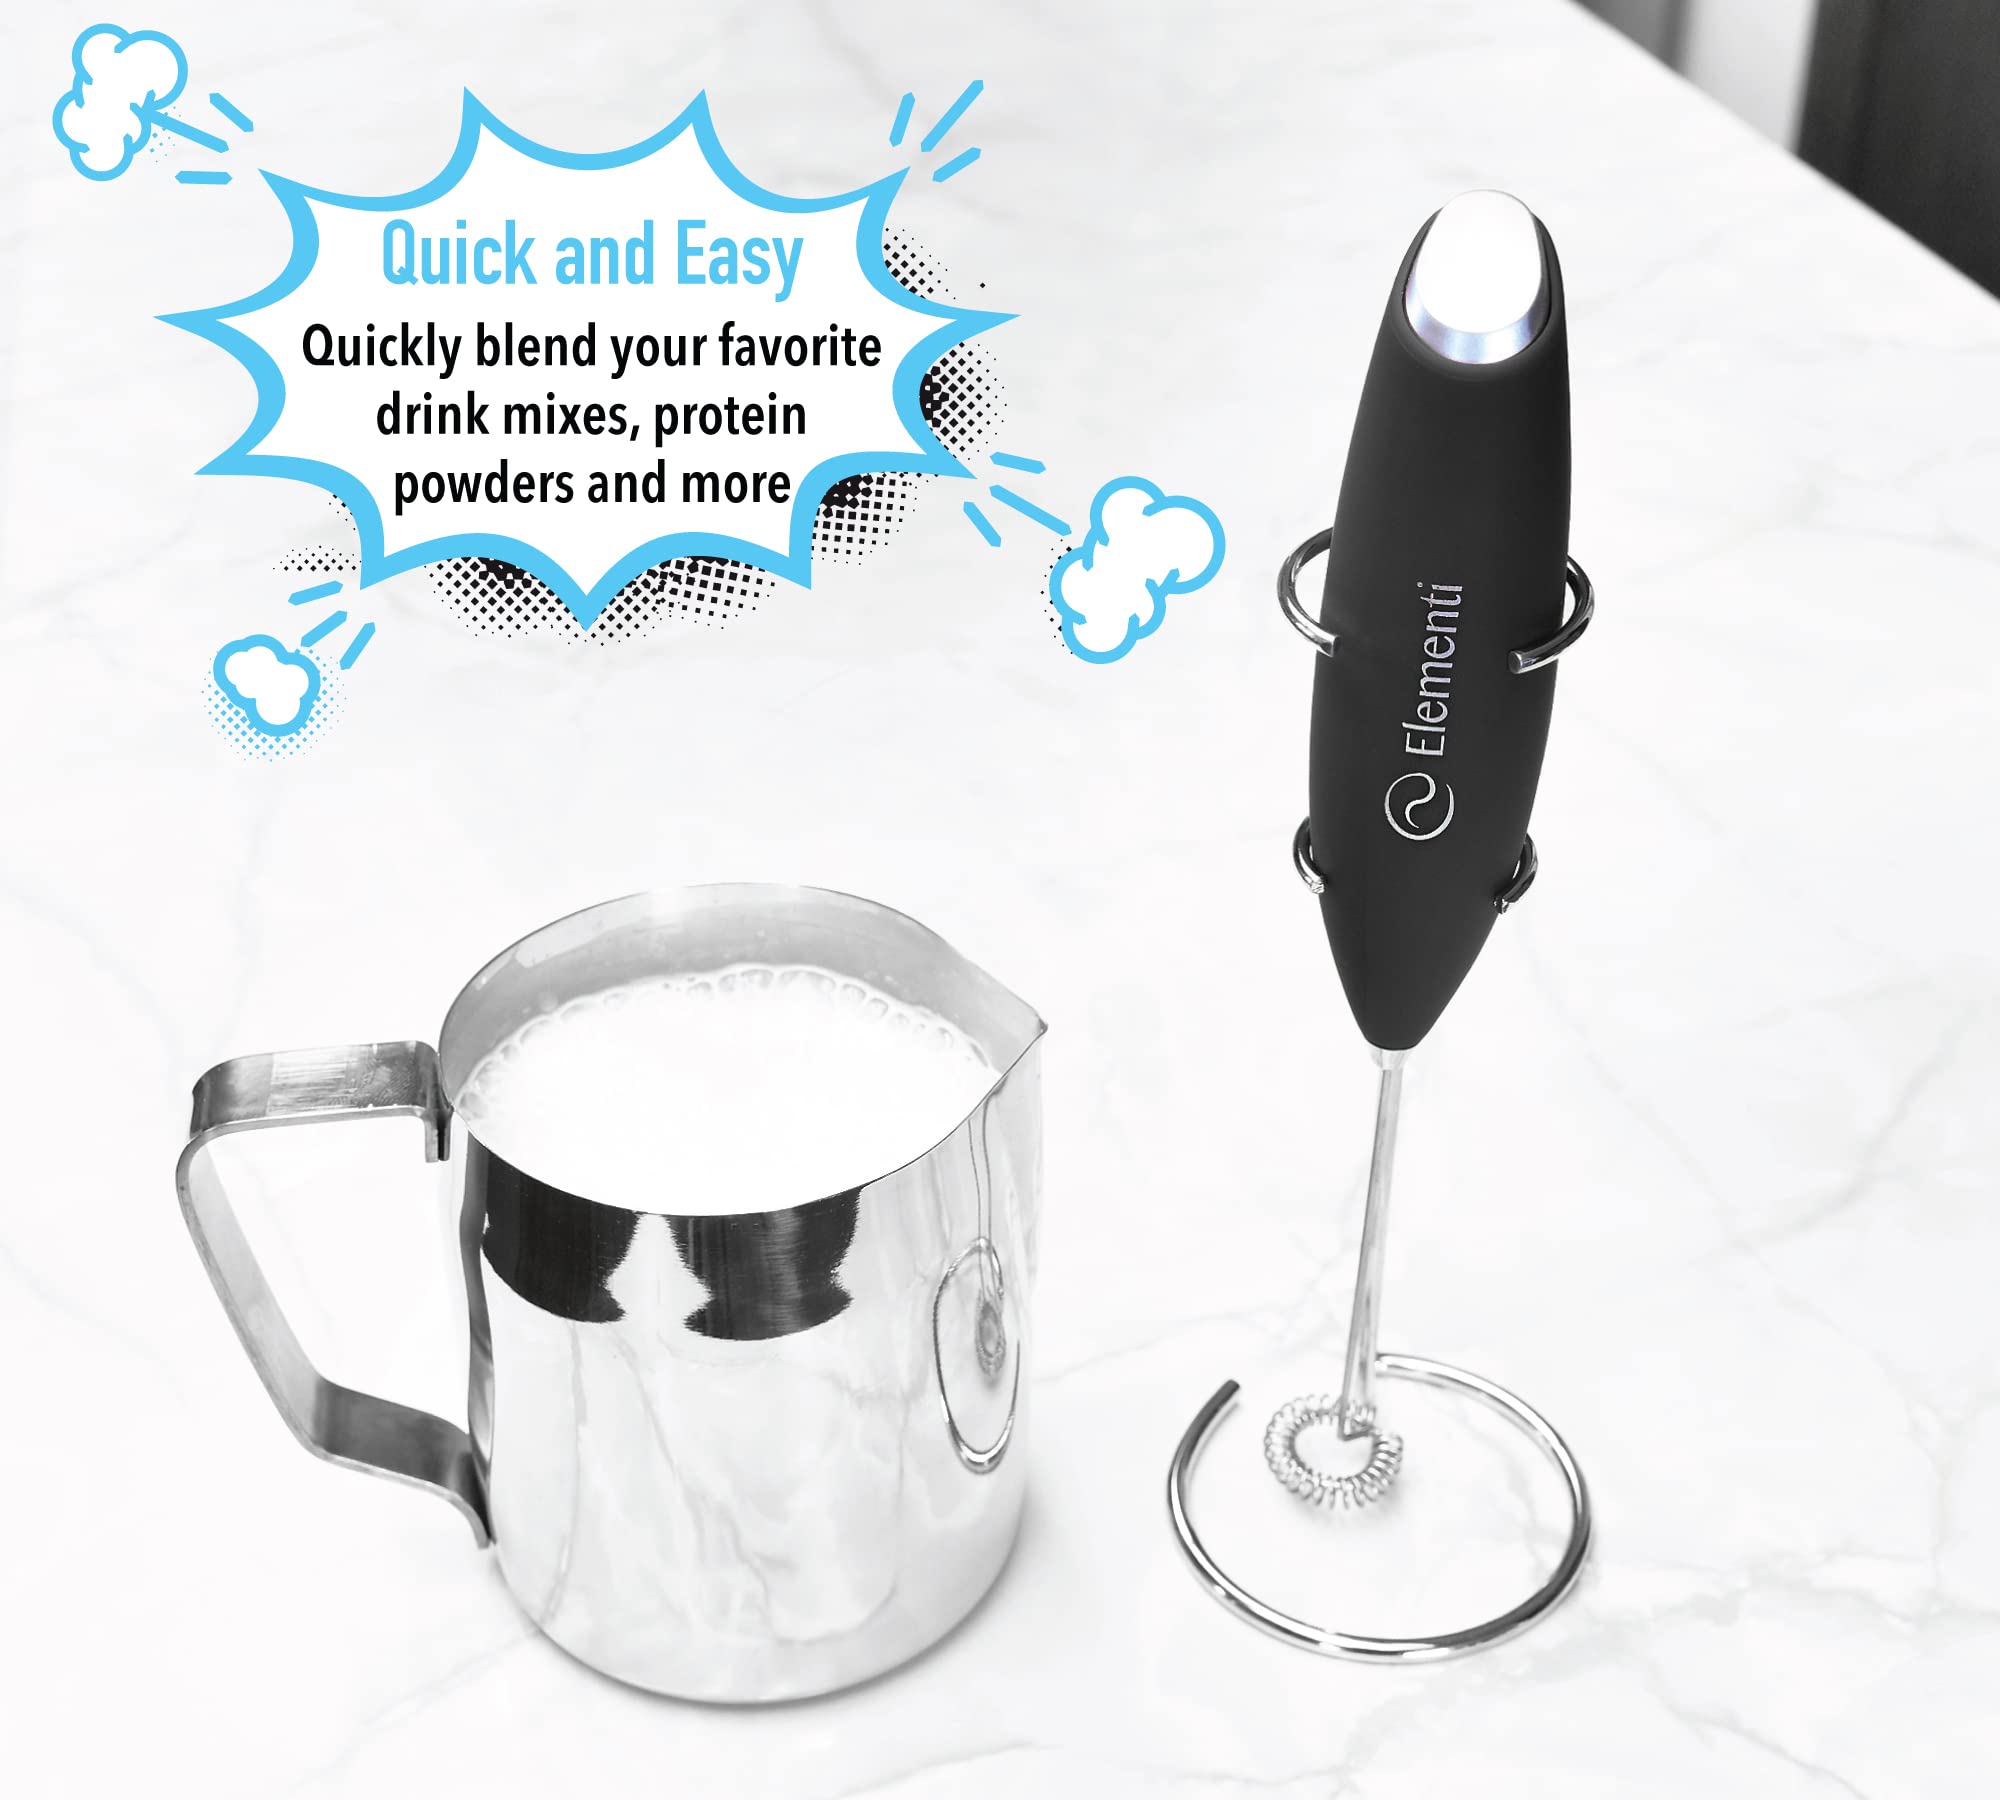 Elementi Milk Frother Wand & Matcha Mixer, Mini Electric Whisk for Coffee - Frother for Coffee - Milk Frother Handheld - Coffee Stirrers Electric Matcha Frother & Hand Whisk (Black)